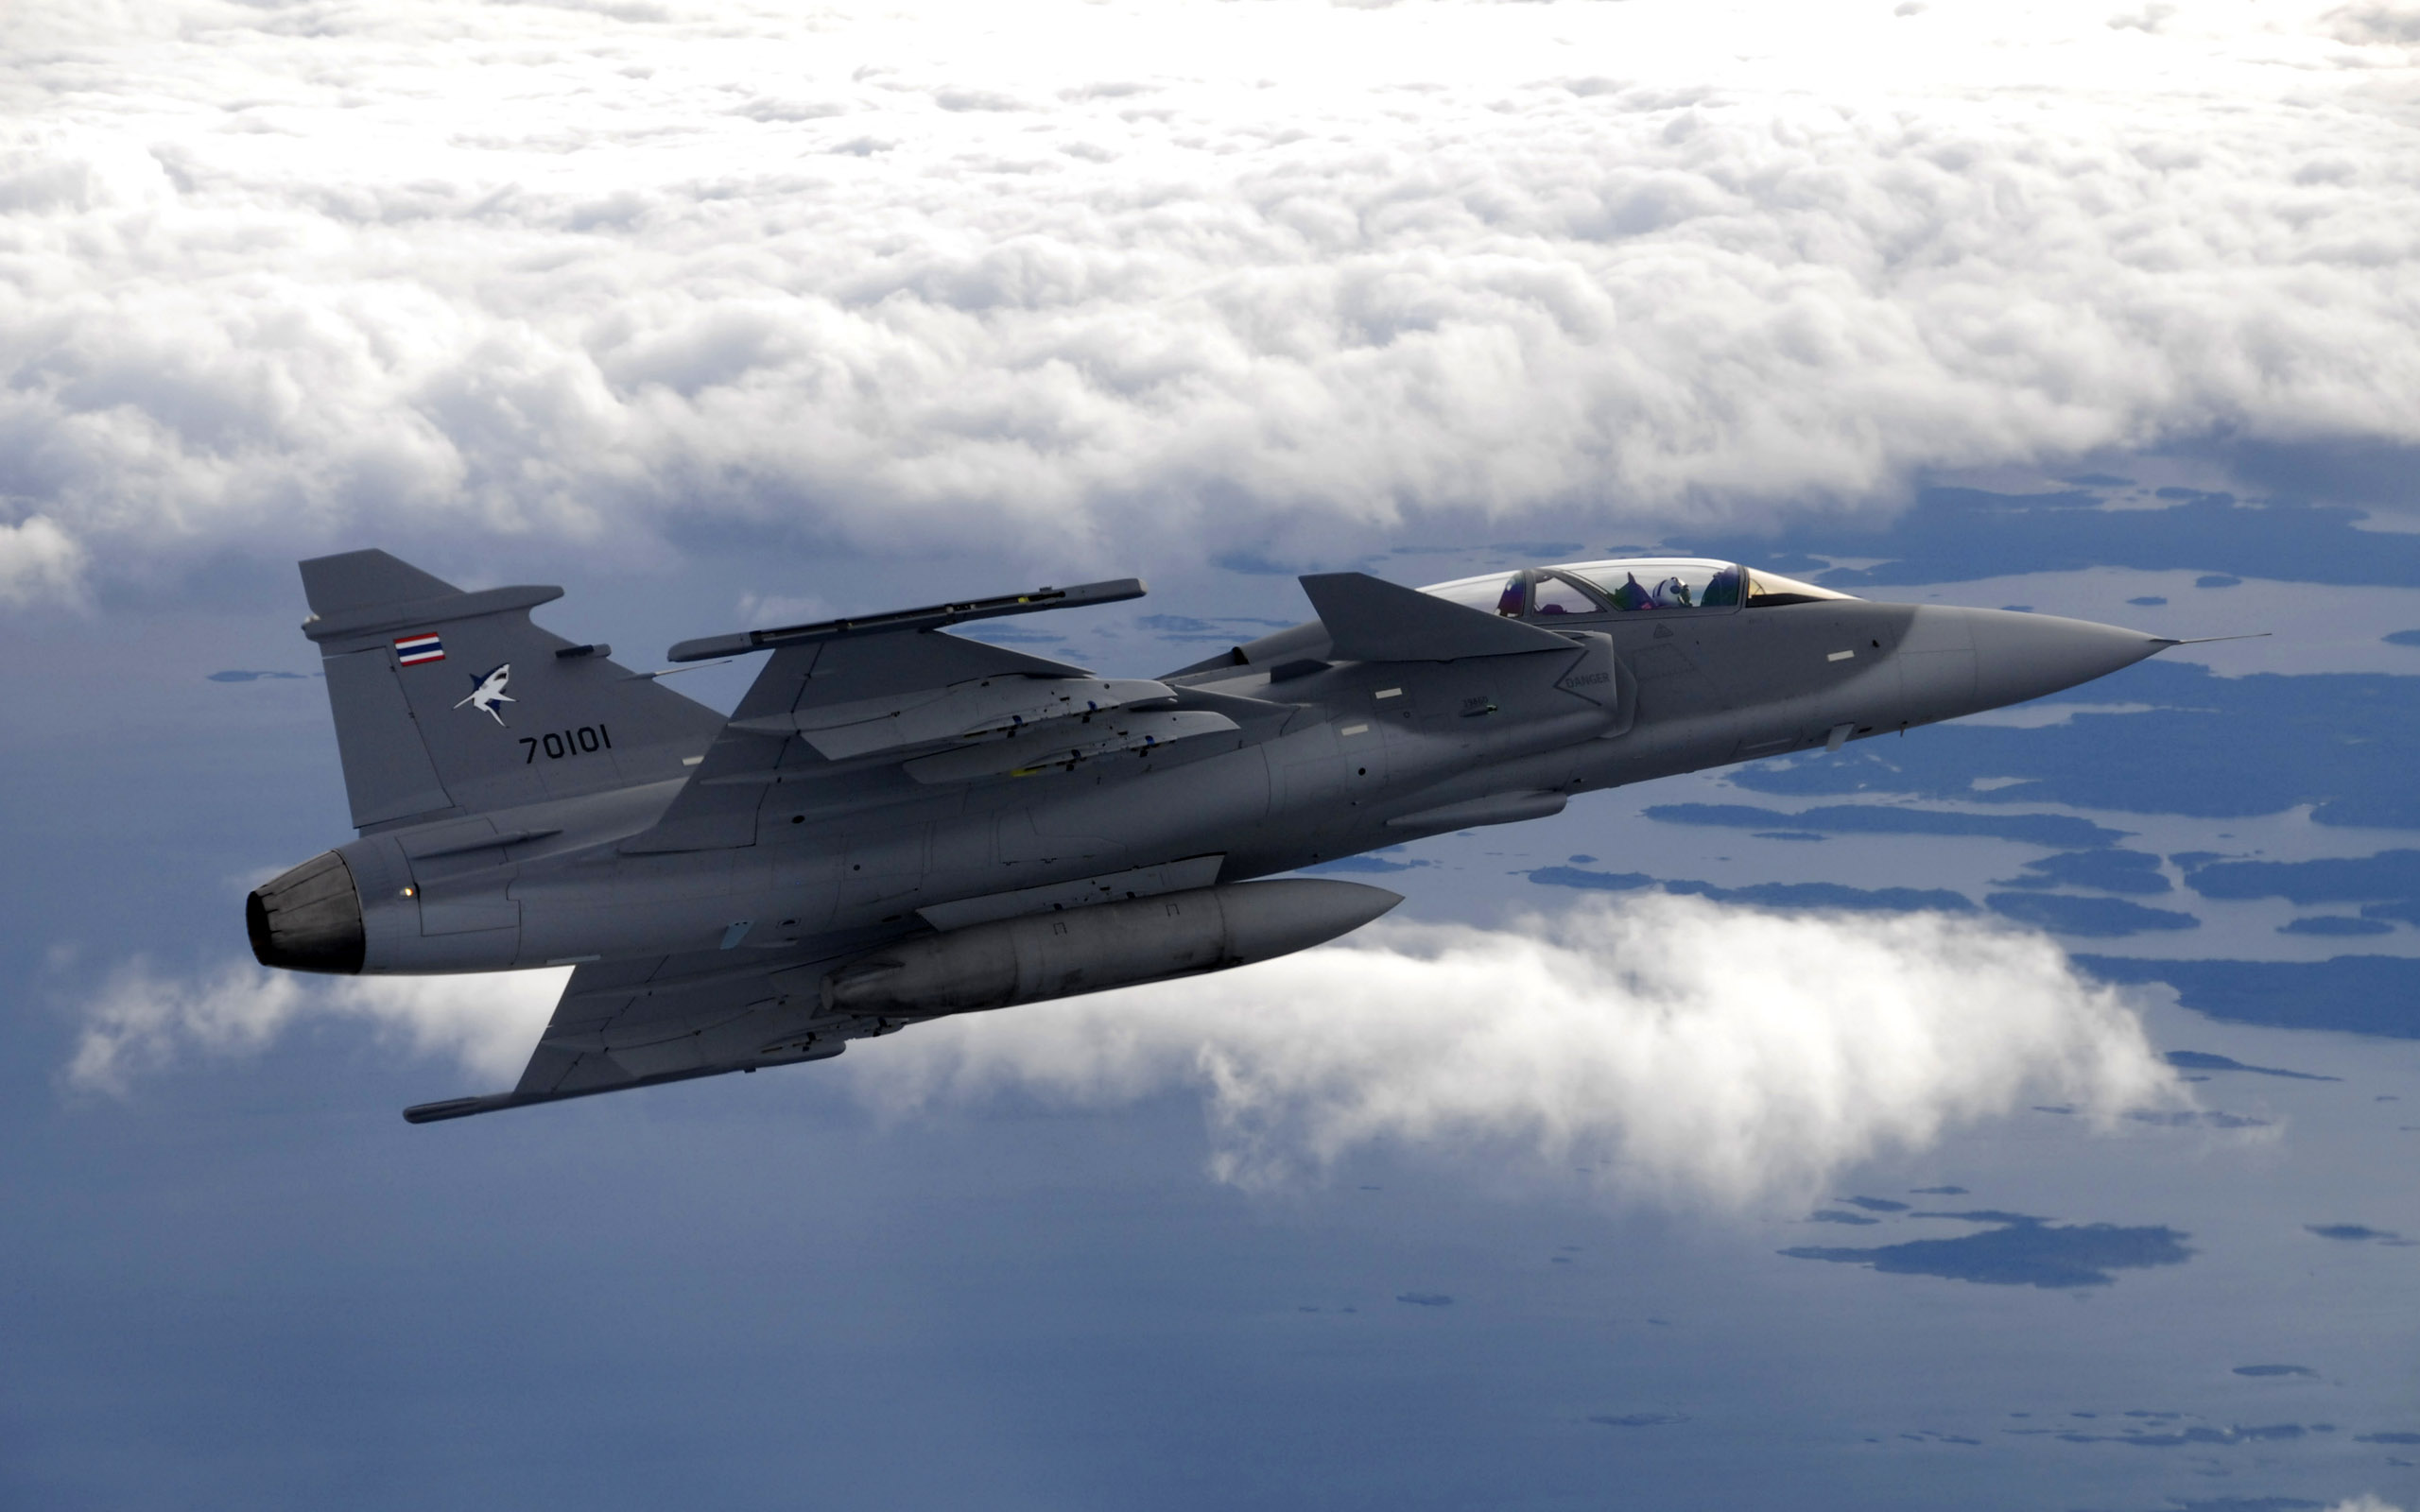 check out the latest Fighter Jets Hd Wallpapers and high definition